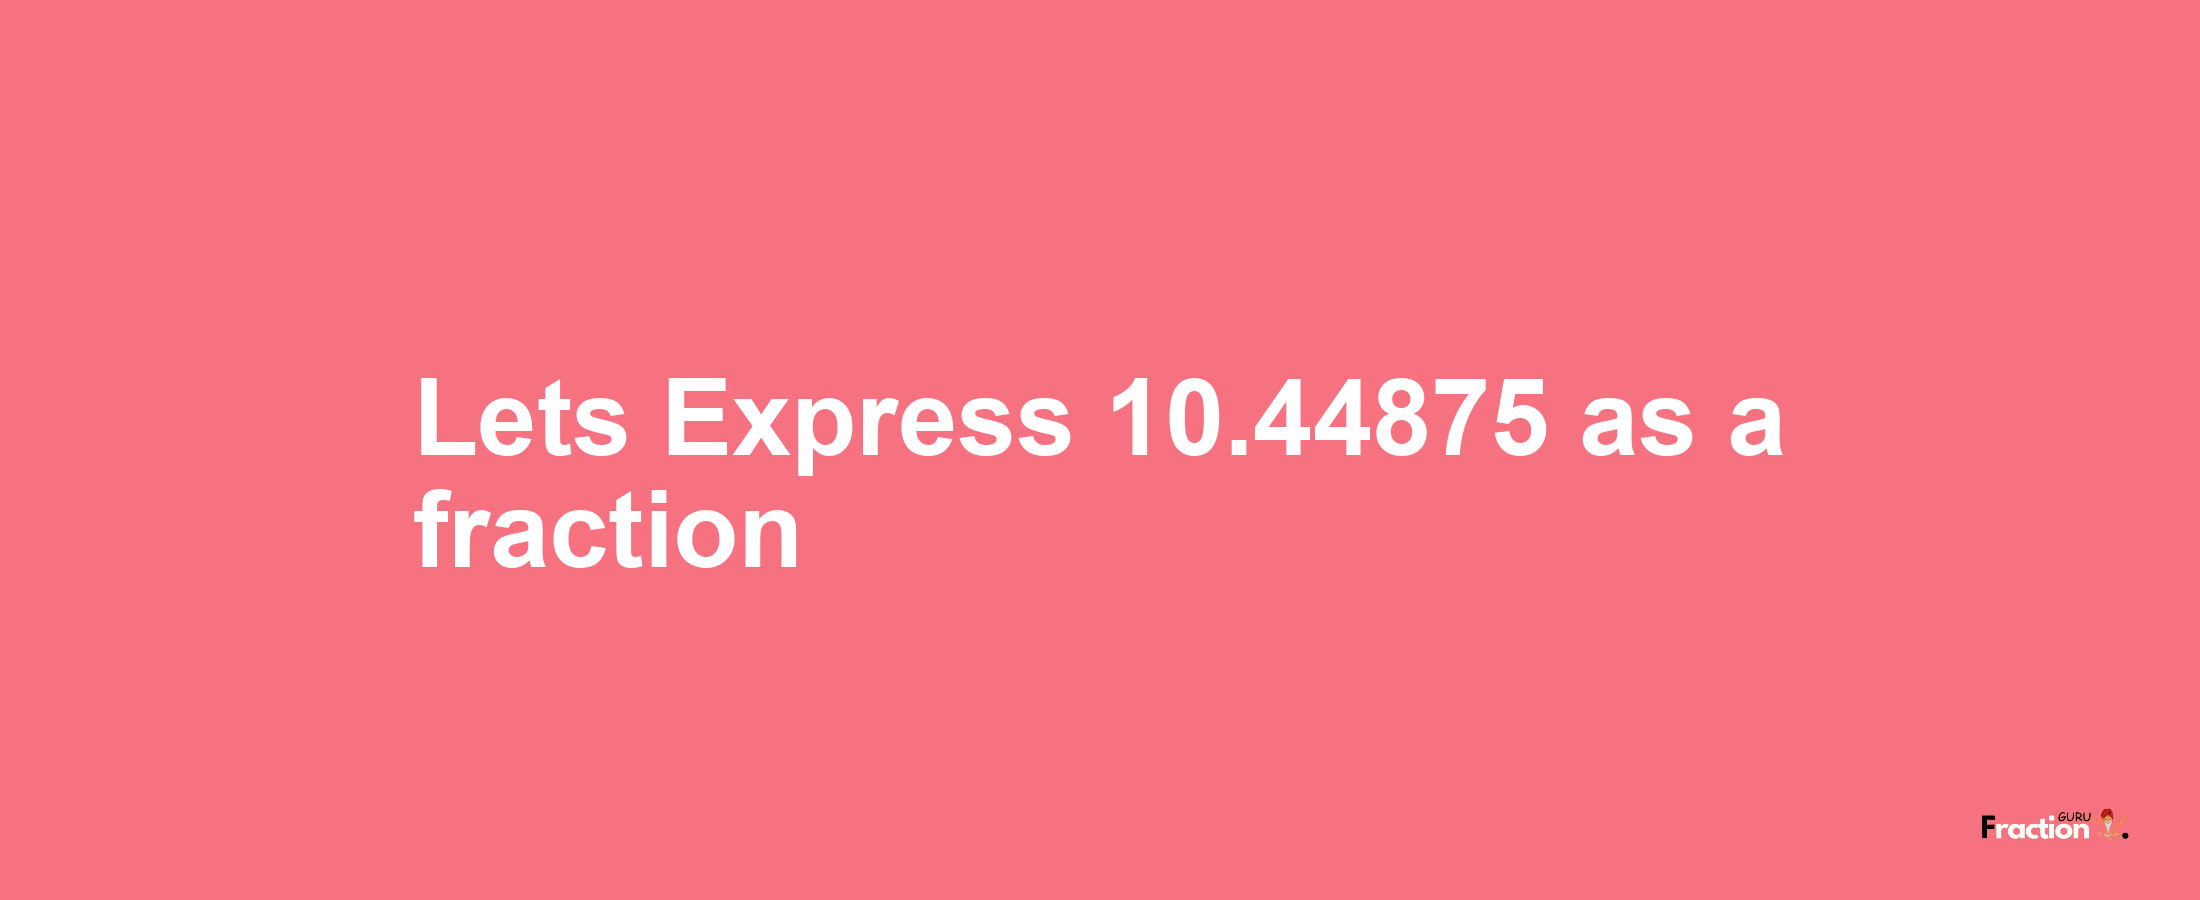 Lets Express 10.44875 as afraction